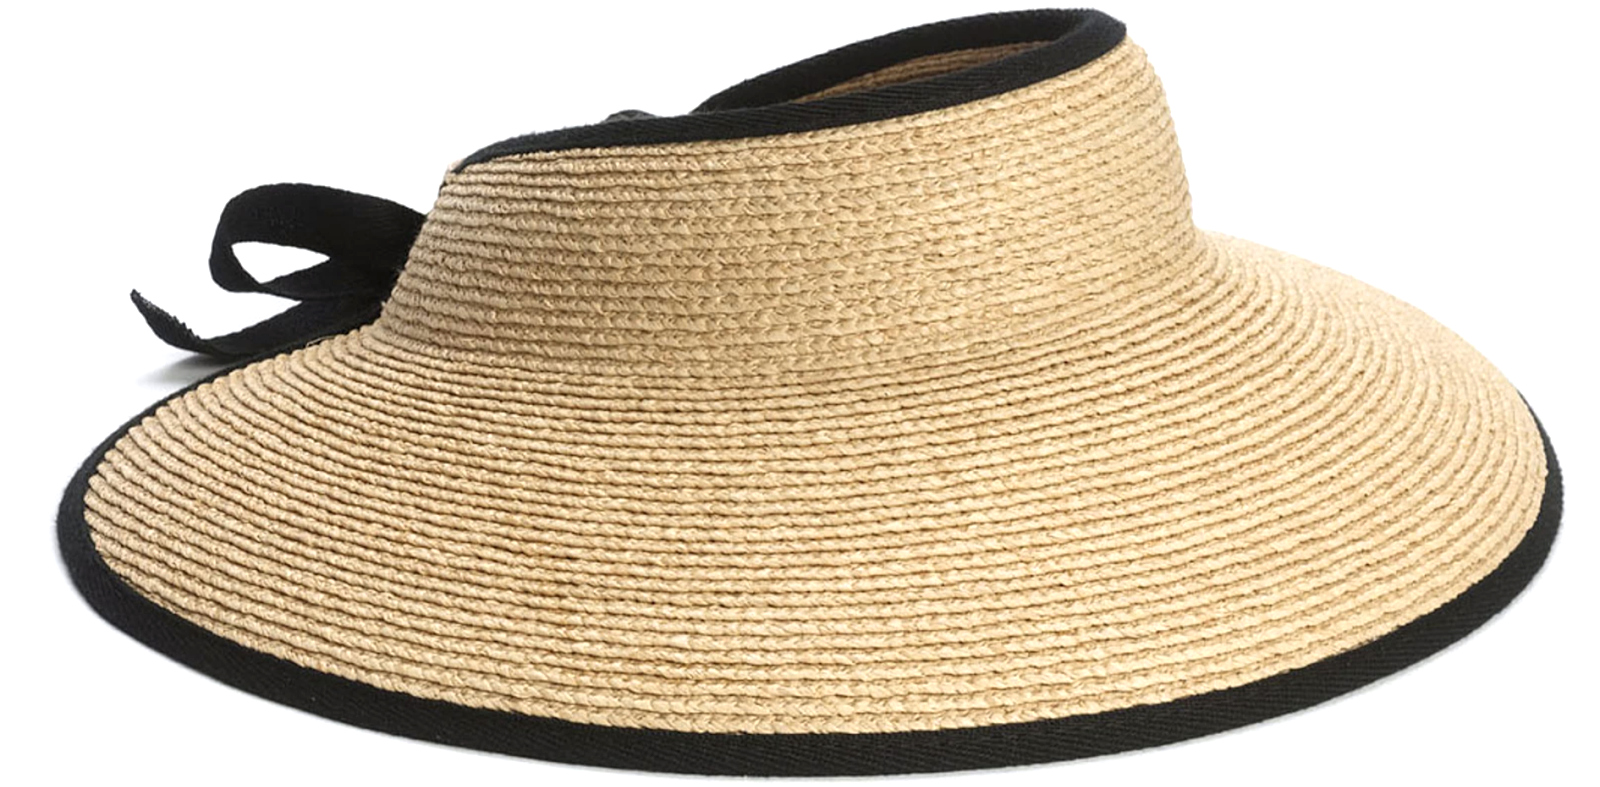 Color : Black GXF Spring and Summer New Ladies Straw hat White top hat Sun hat Travel Sun hat Photo hat 